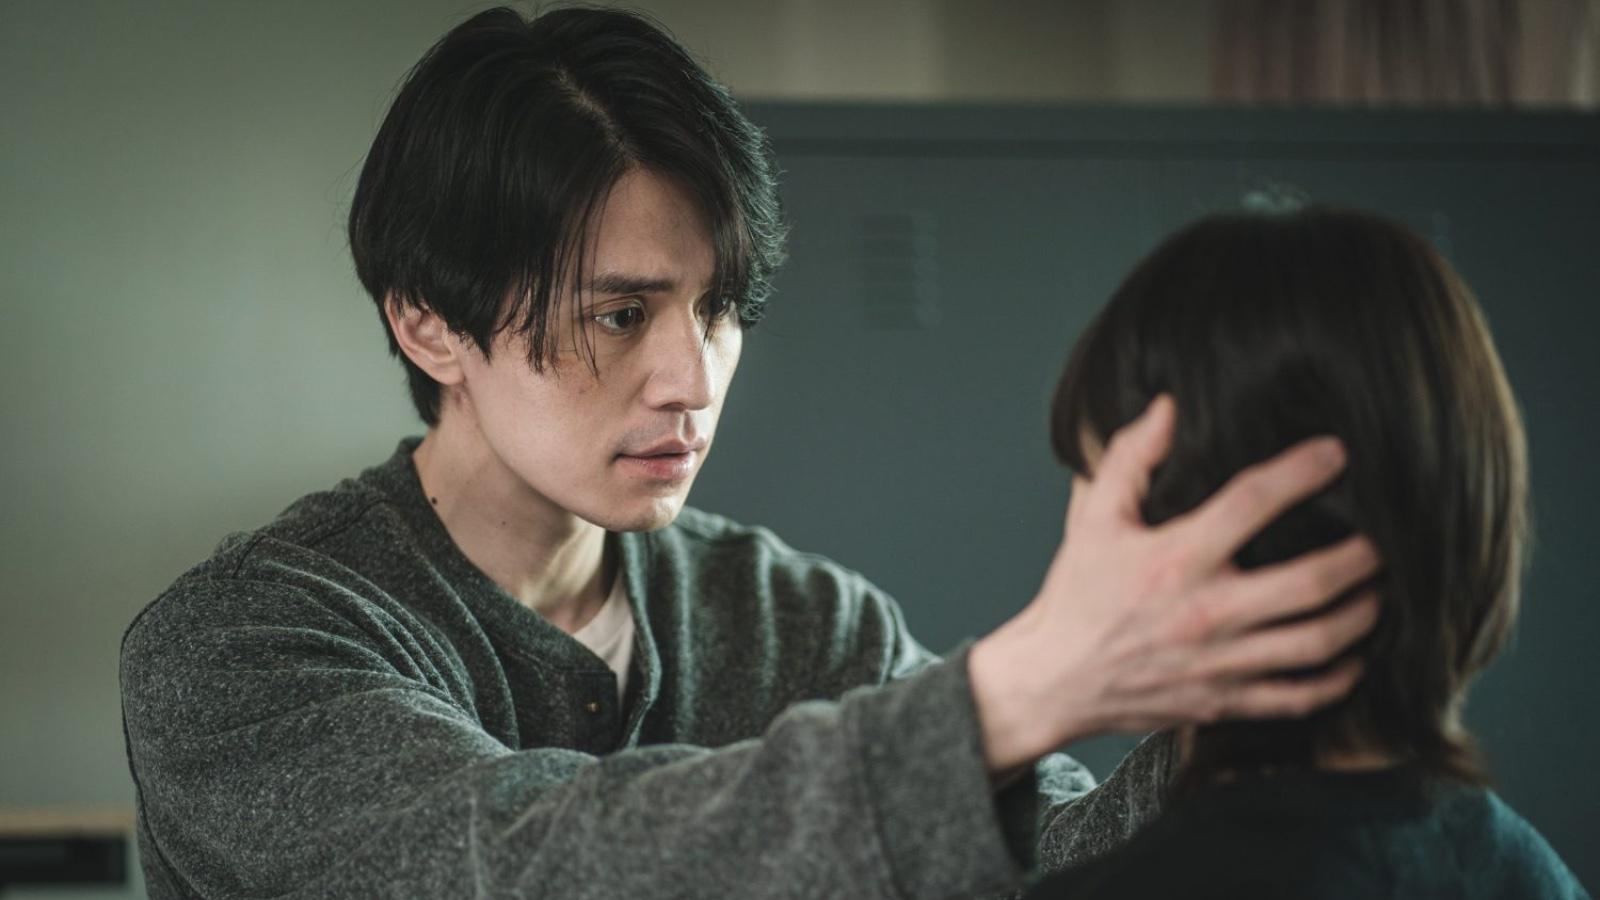 Jin-man in A Shop For Killers played by Lee Dong-wook.